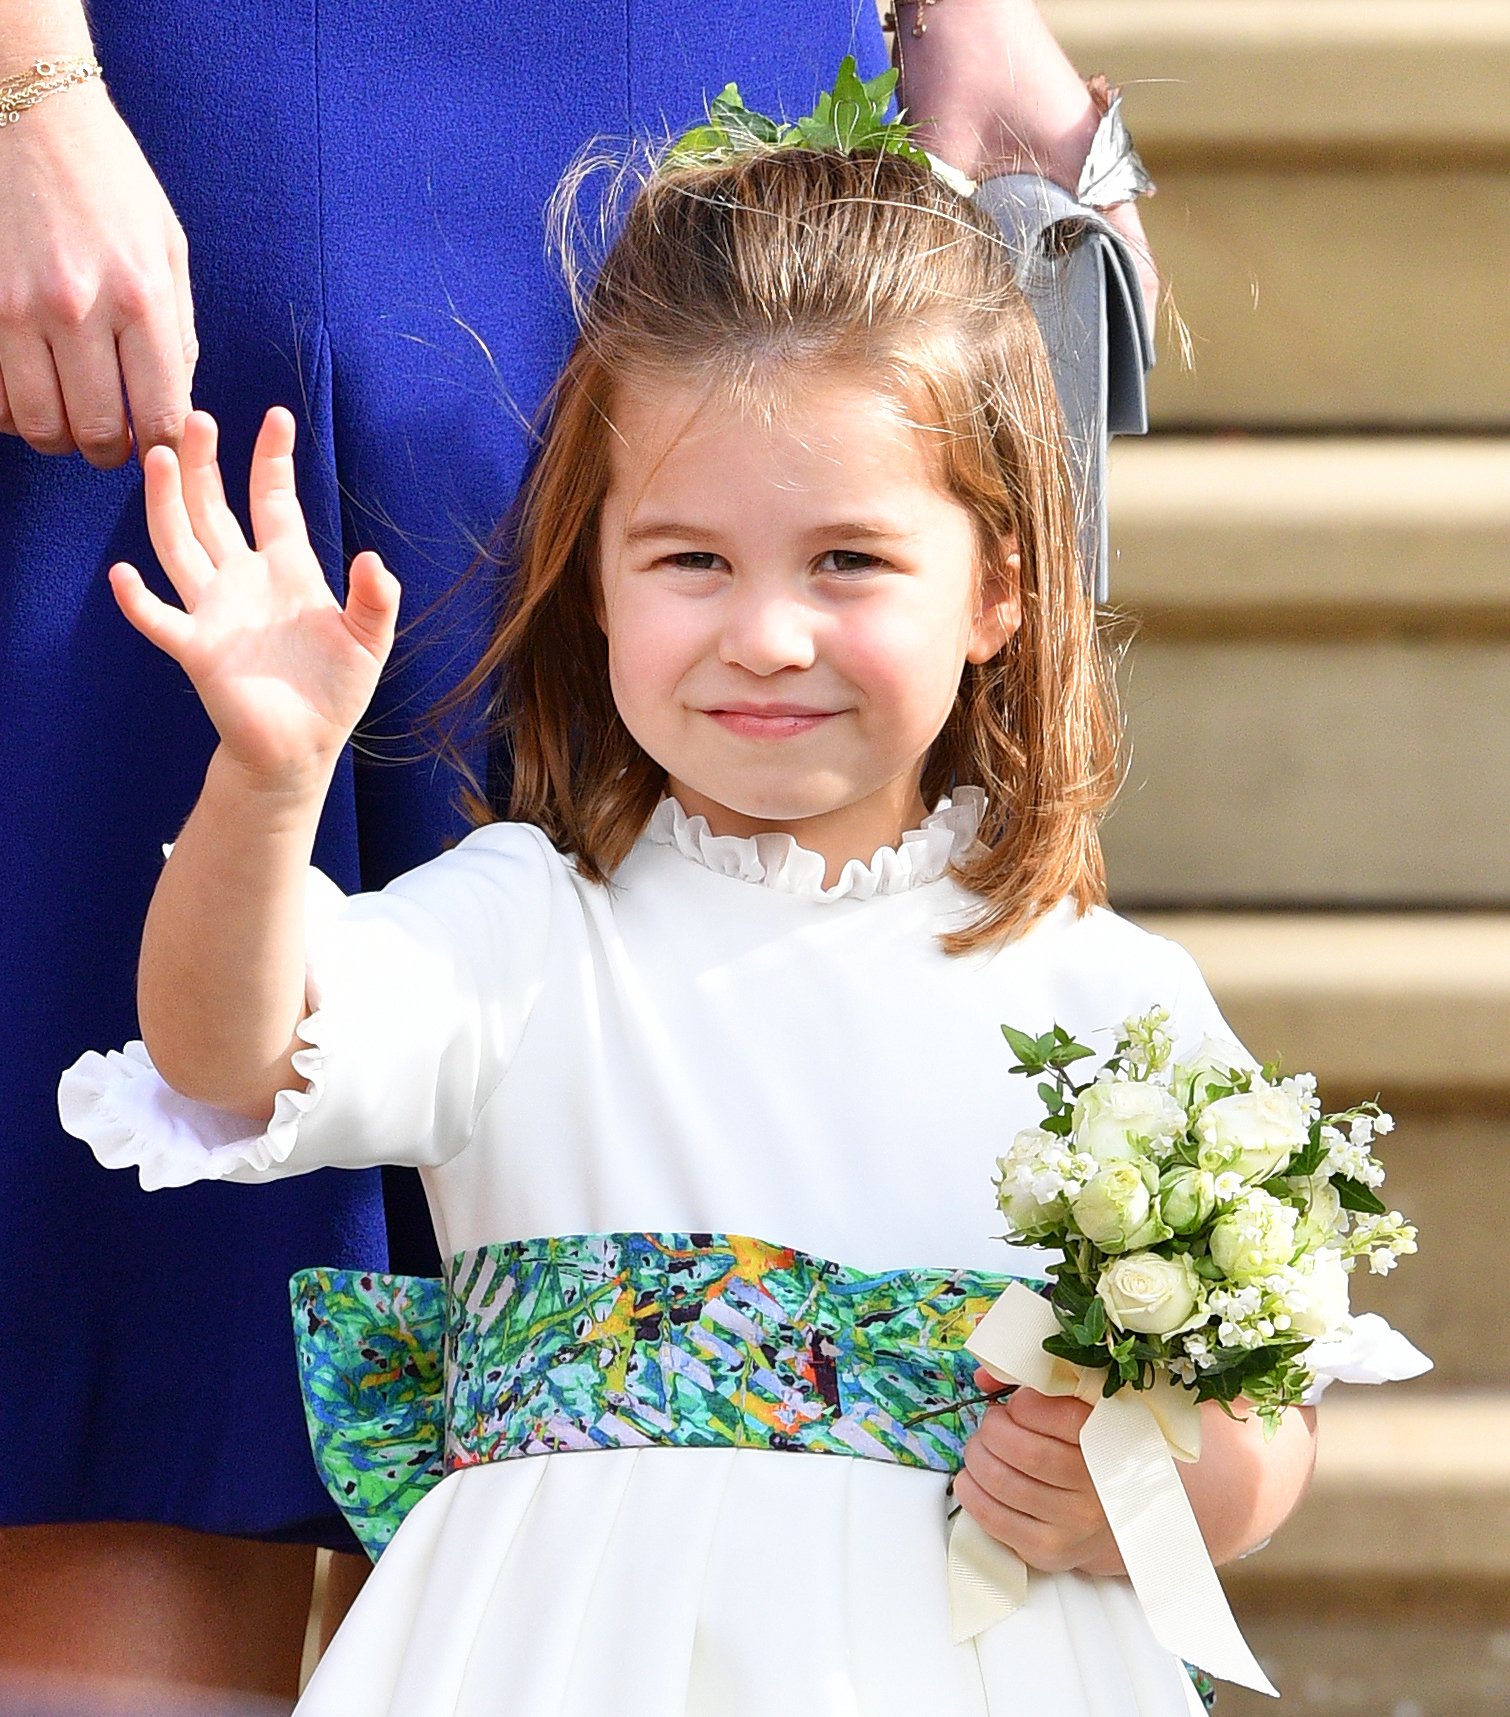 Princess Charlotte pictured at the wedding of Princess Eugenie of York and Jack Brooksbank at St George's Chapel, 2018, England. | Photo: Getty Images